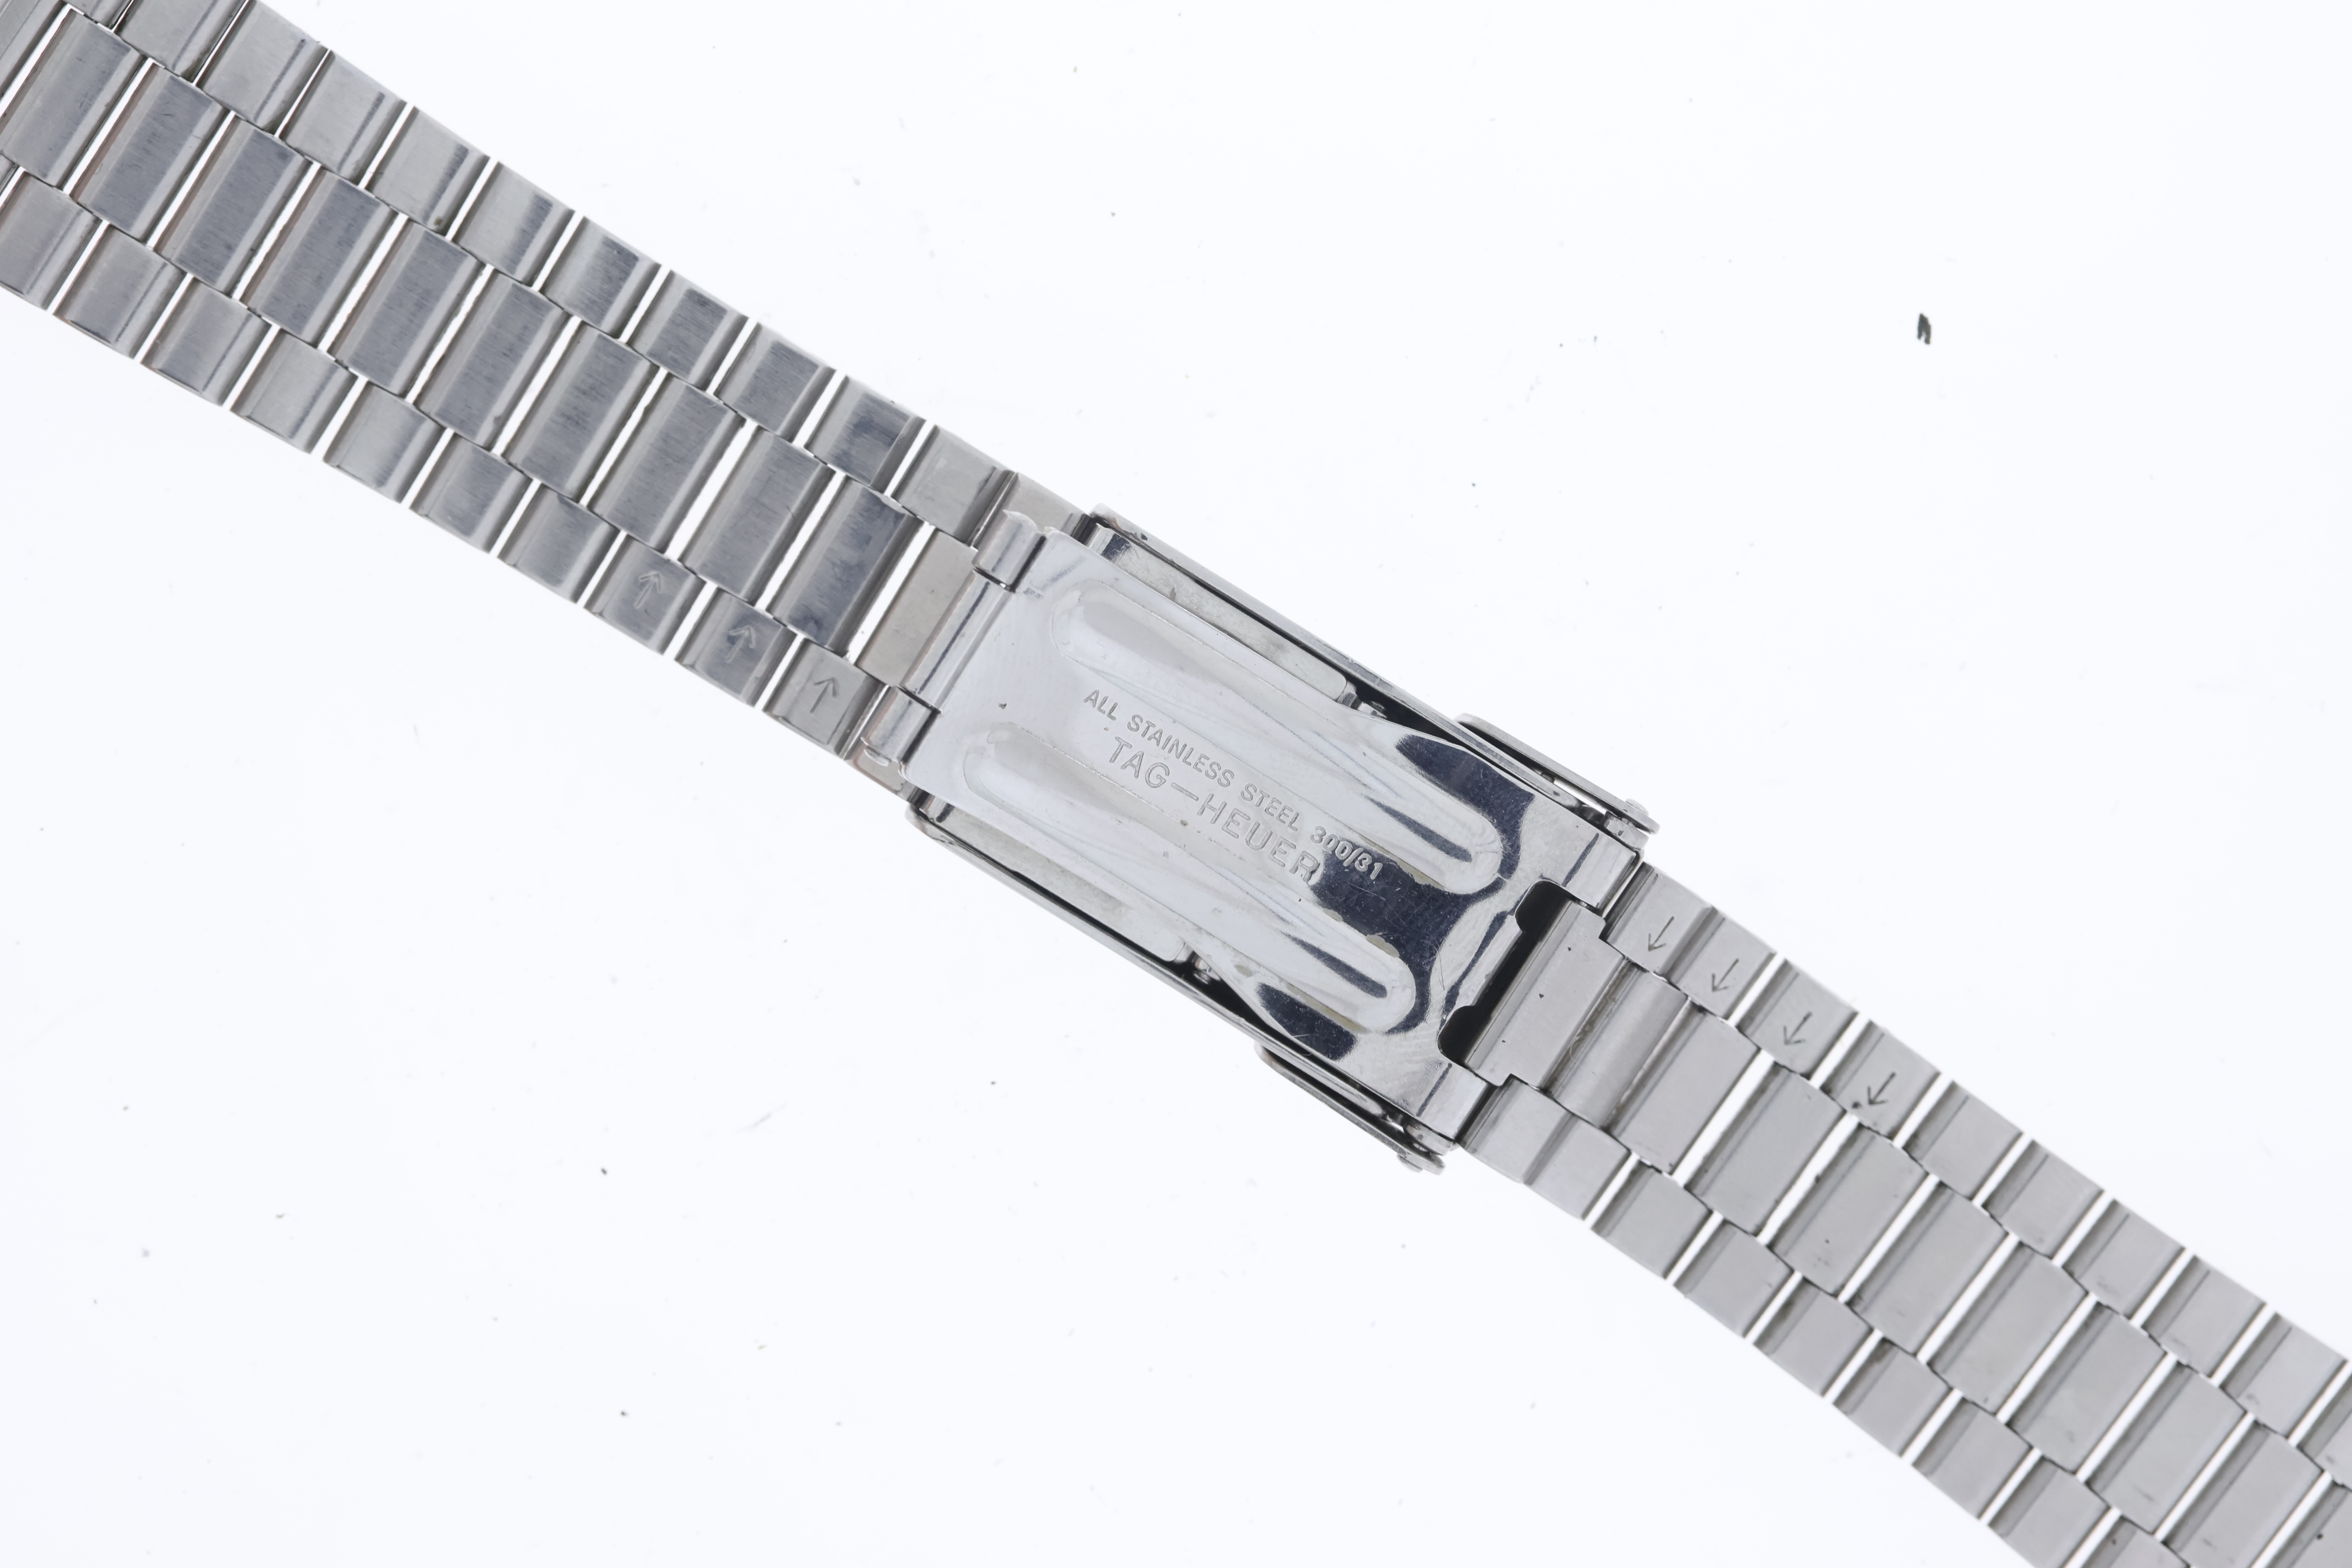 Tag Heuer 2000's 1st gen stainless steel bracelet with 20mm lugs. 150mm in length, 178 extended - Bild 4 aus 4